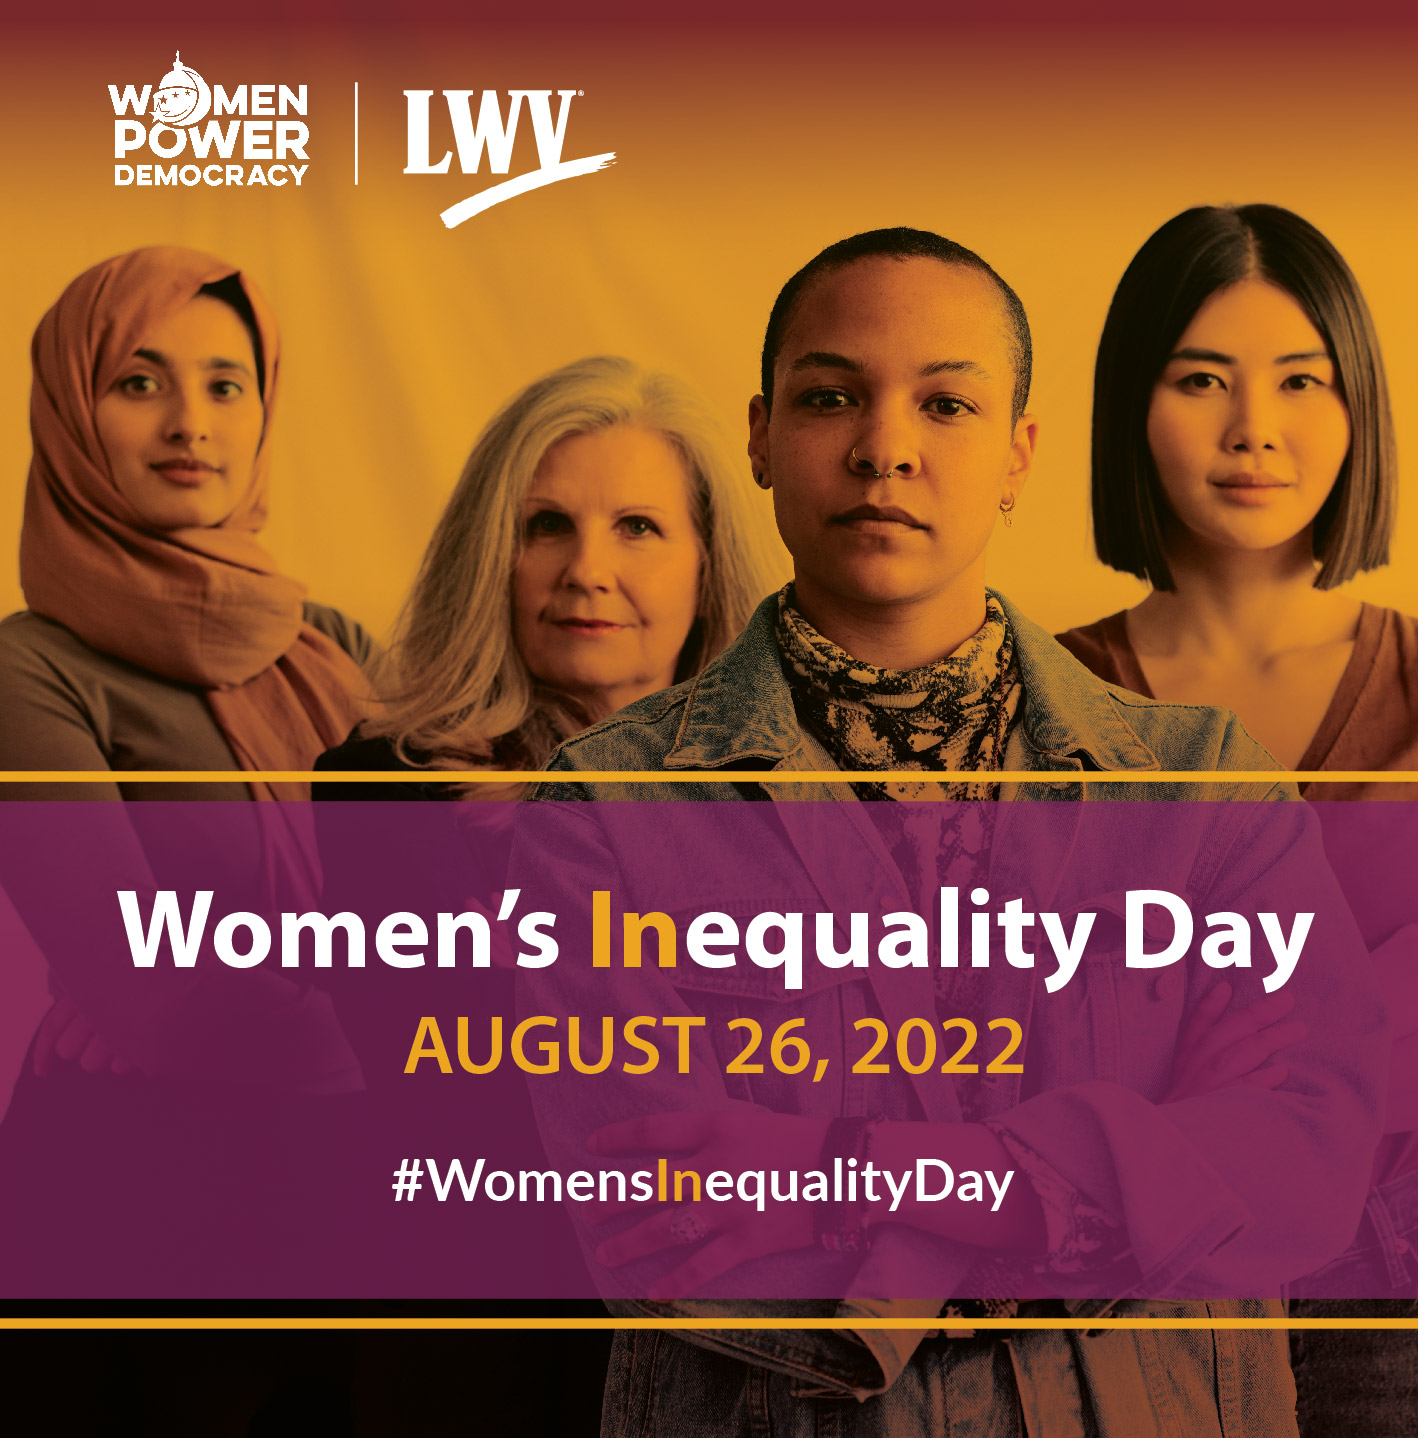 Photo of four women with text" Women's Inequality Day, August 26, 2022"